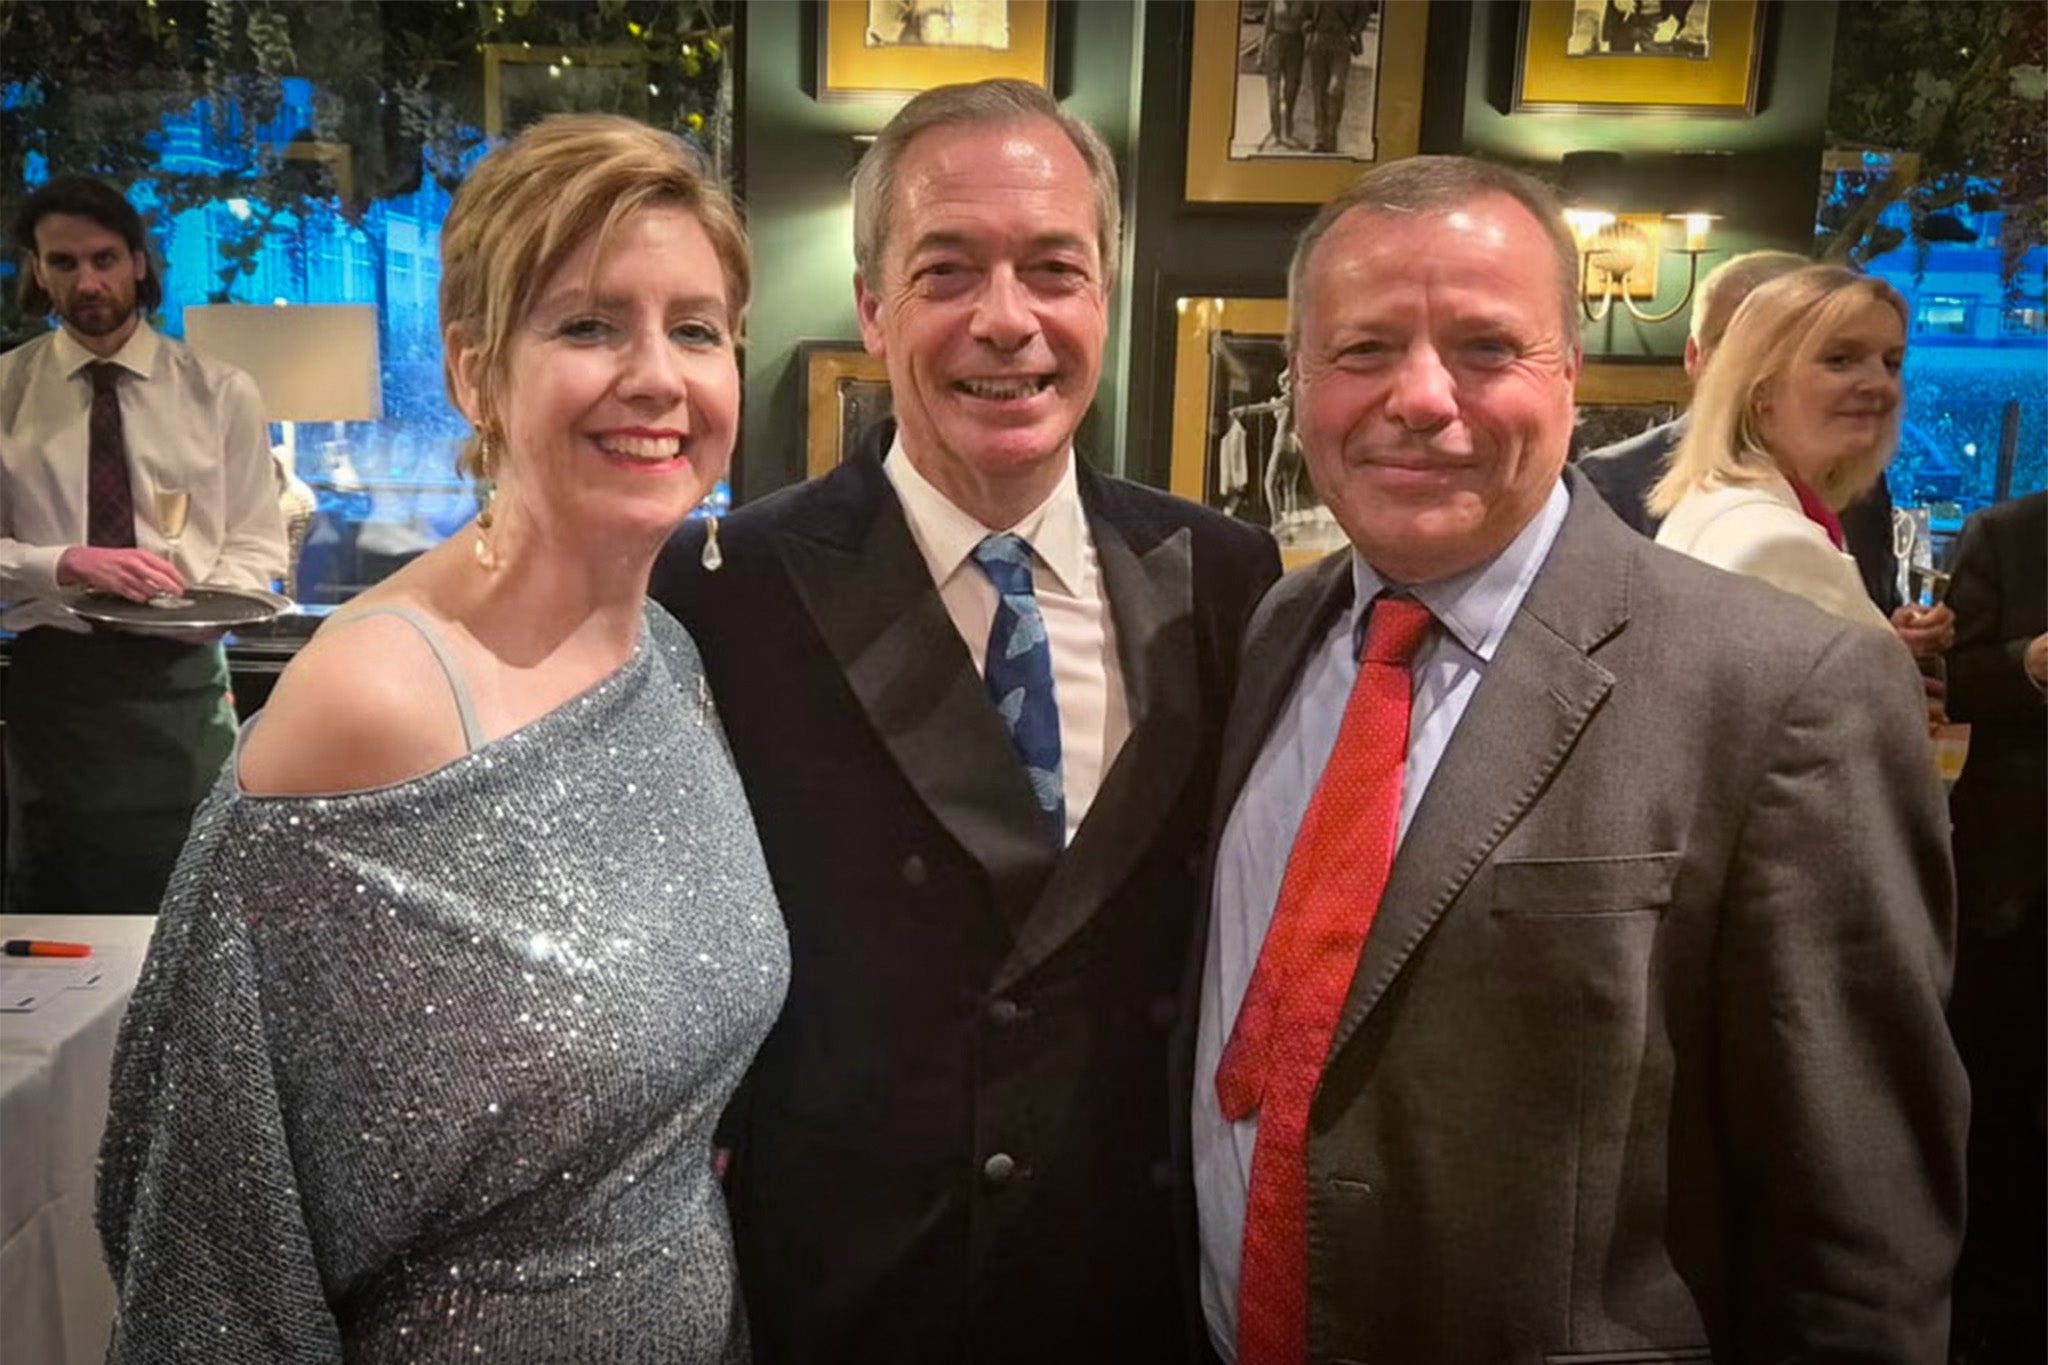 Cheers! Nigel Farage at his birthday party with Aaron Banks and Andrea Jenkyns